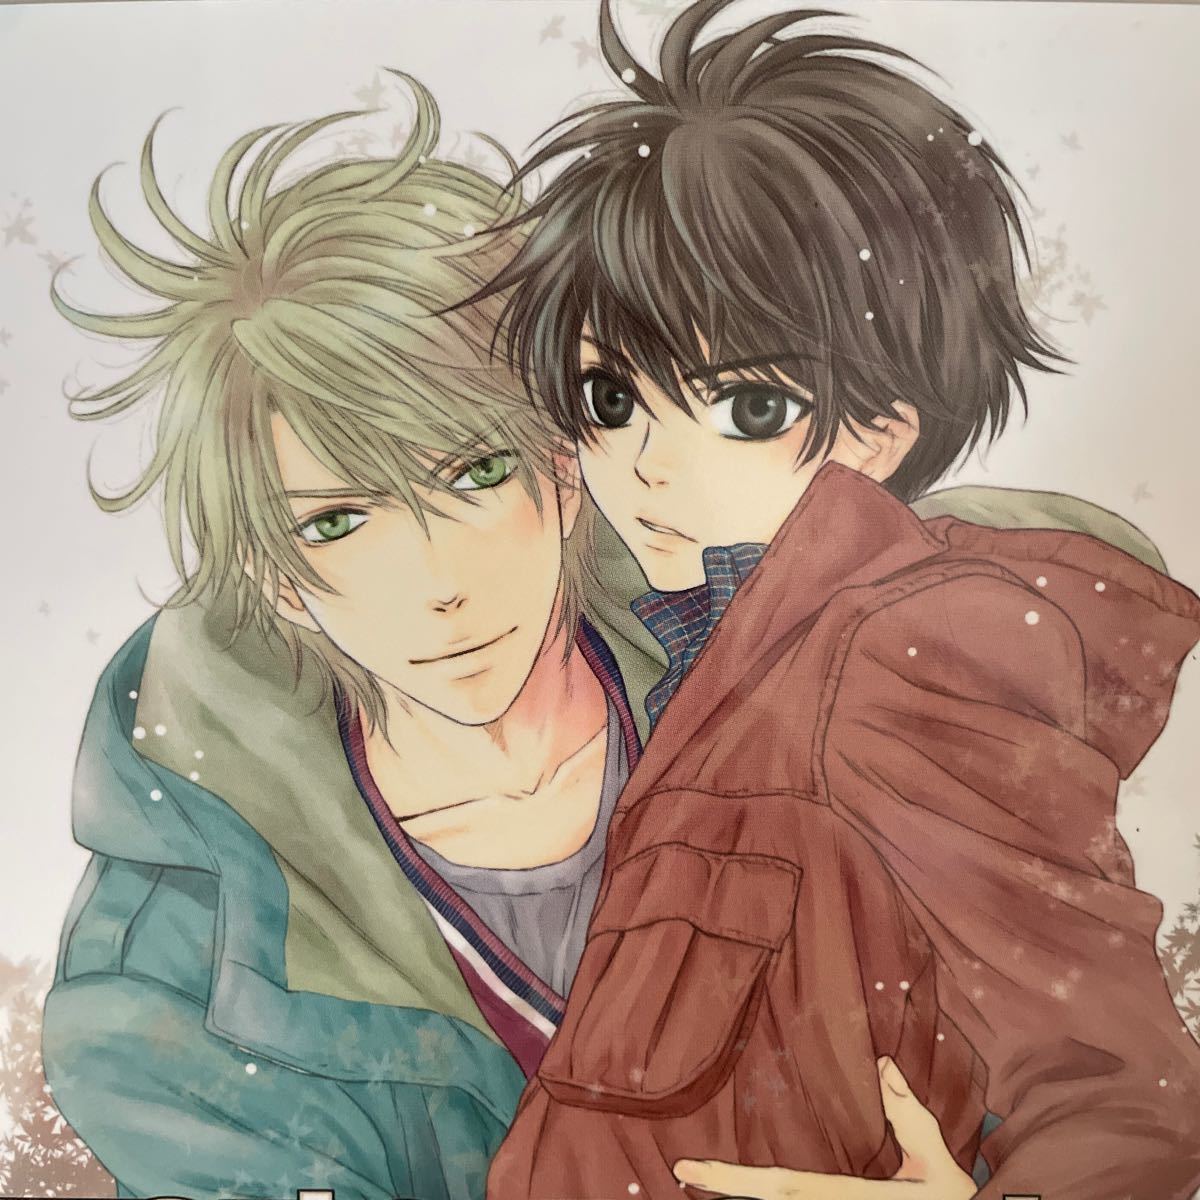 Paypayフリマ Super Lovers 6 あべ美幸 ワンコ攻め ほのぼの 男前受け 身長 体格差 アニメ化された王道の純粋bl